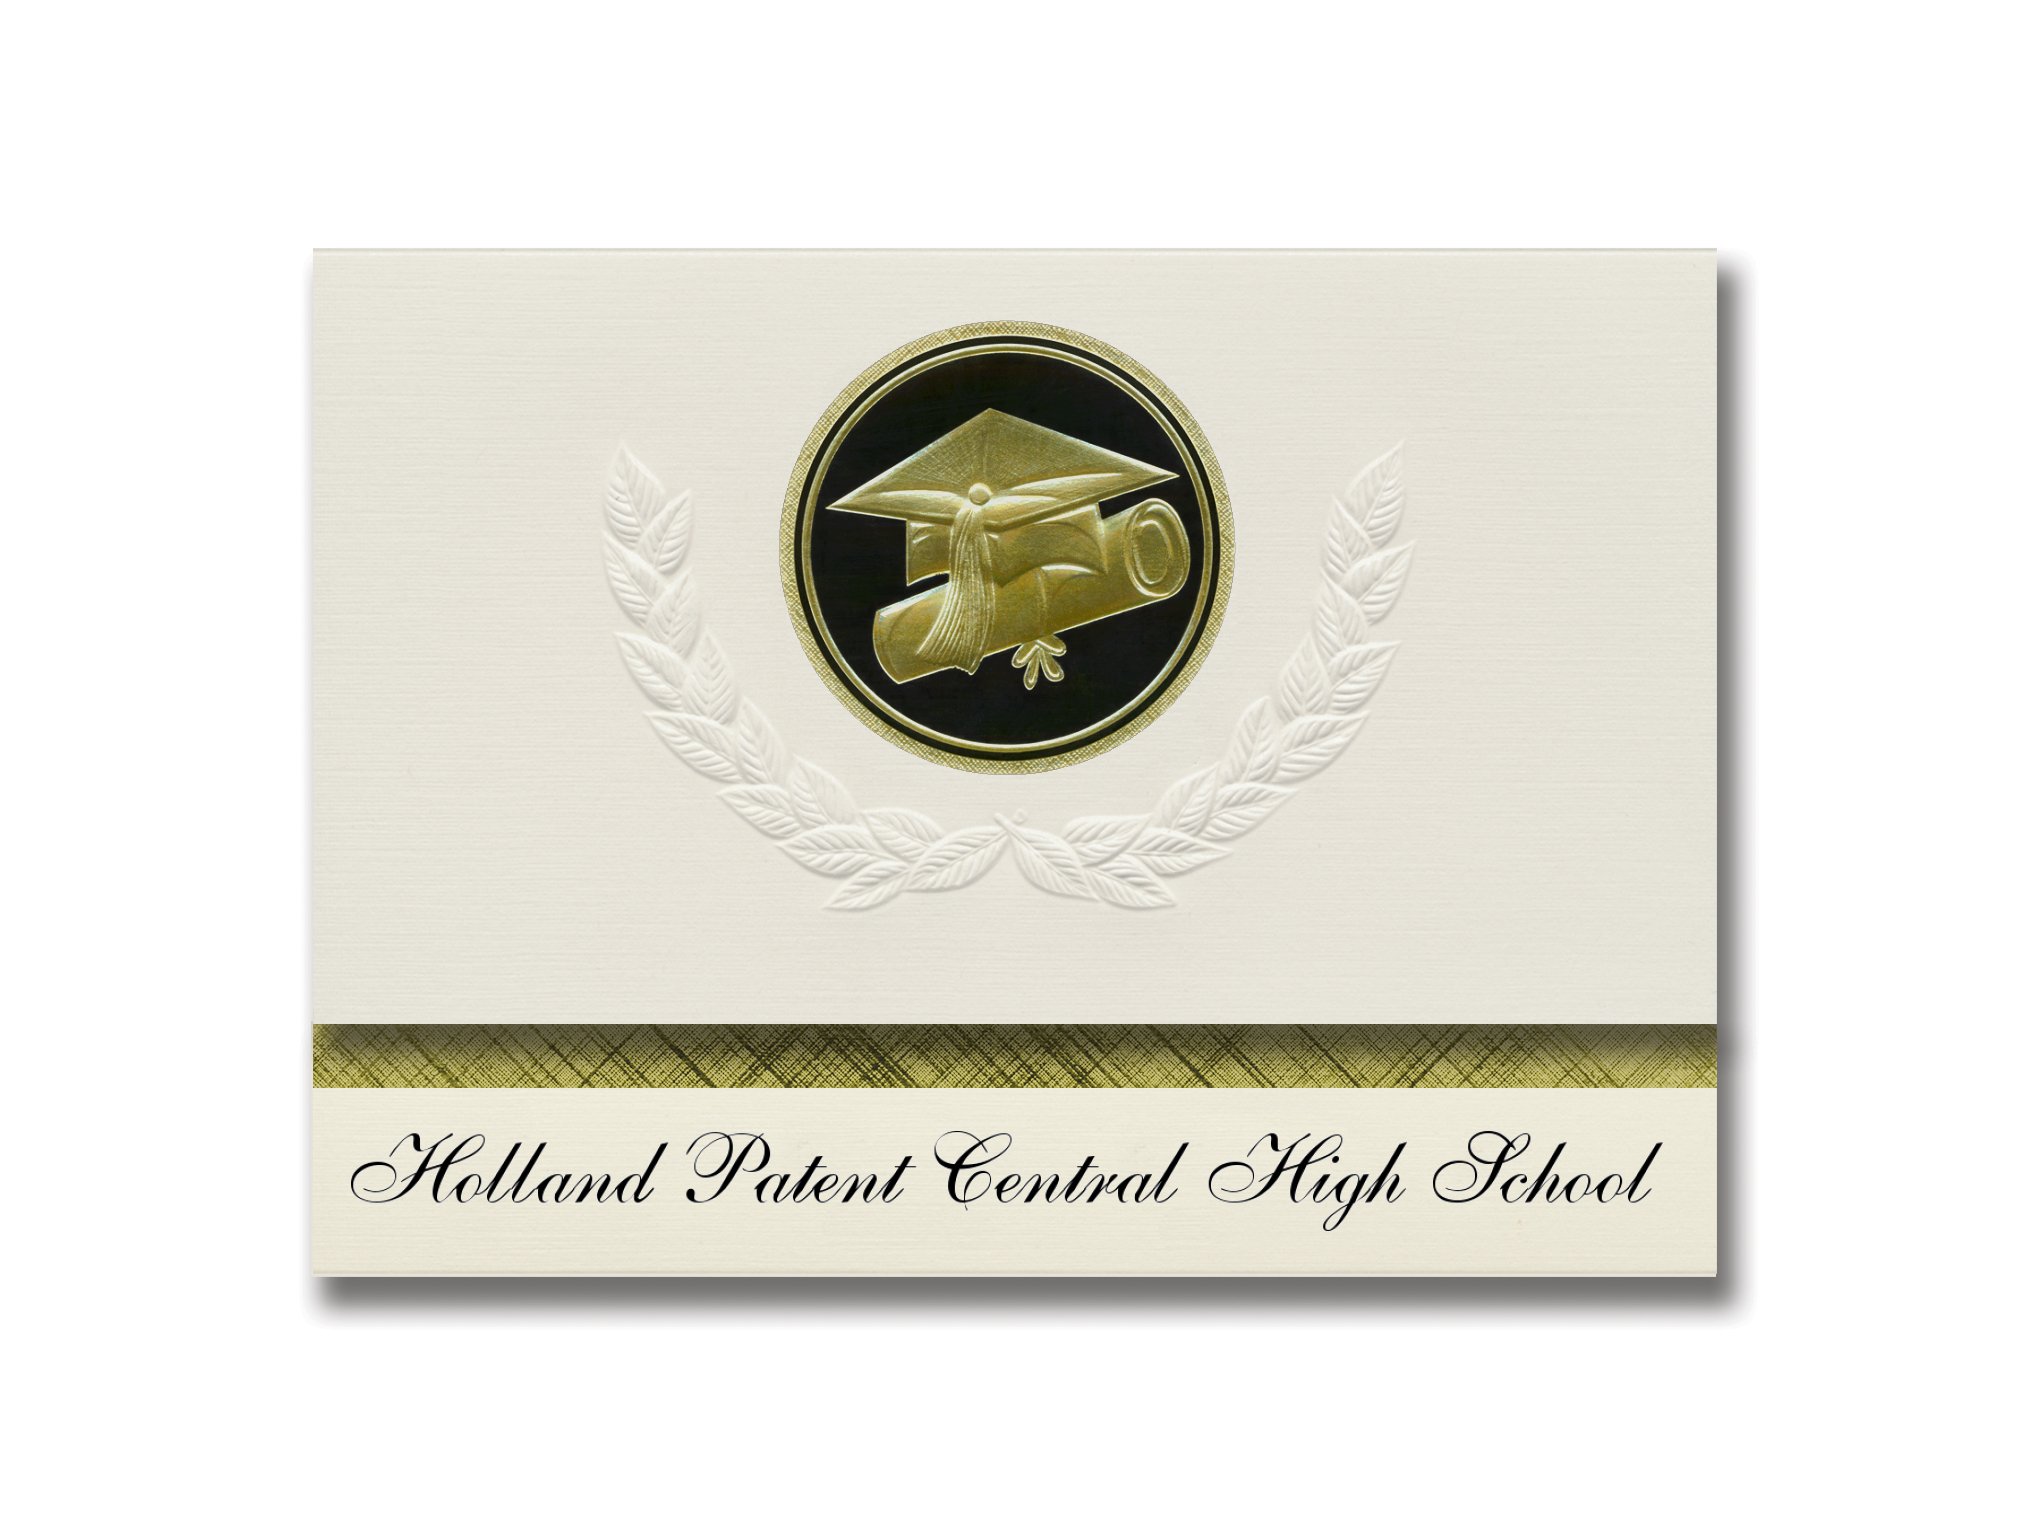 Signature Announcements Holland Patent Central High School (Holland Patent, NY) Graduation Announcements, Presidential Elite Pack 25 Cap & Diploma ...